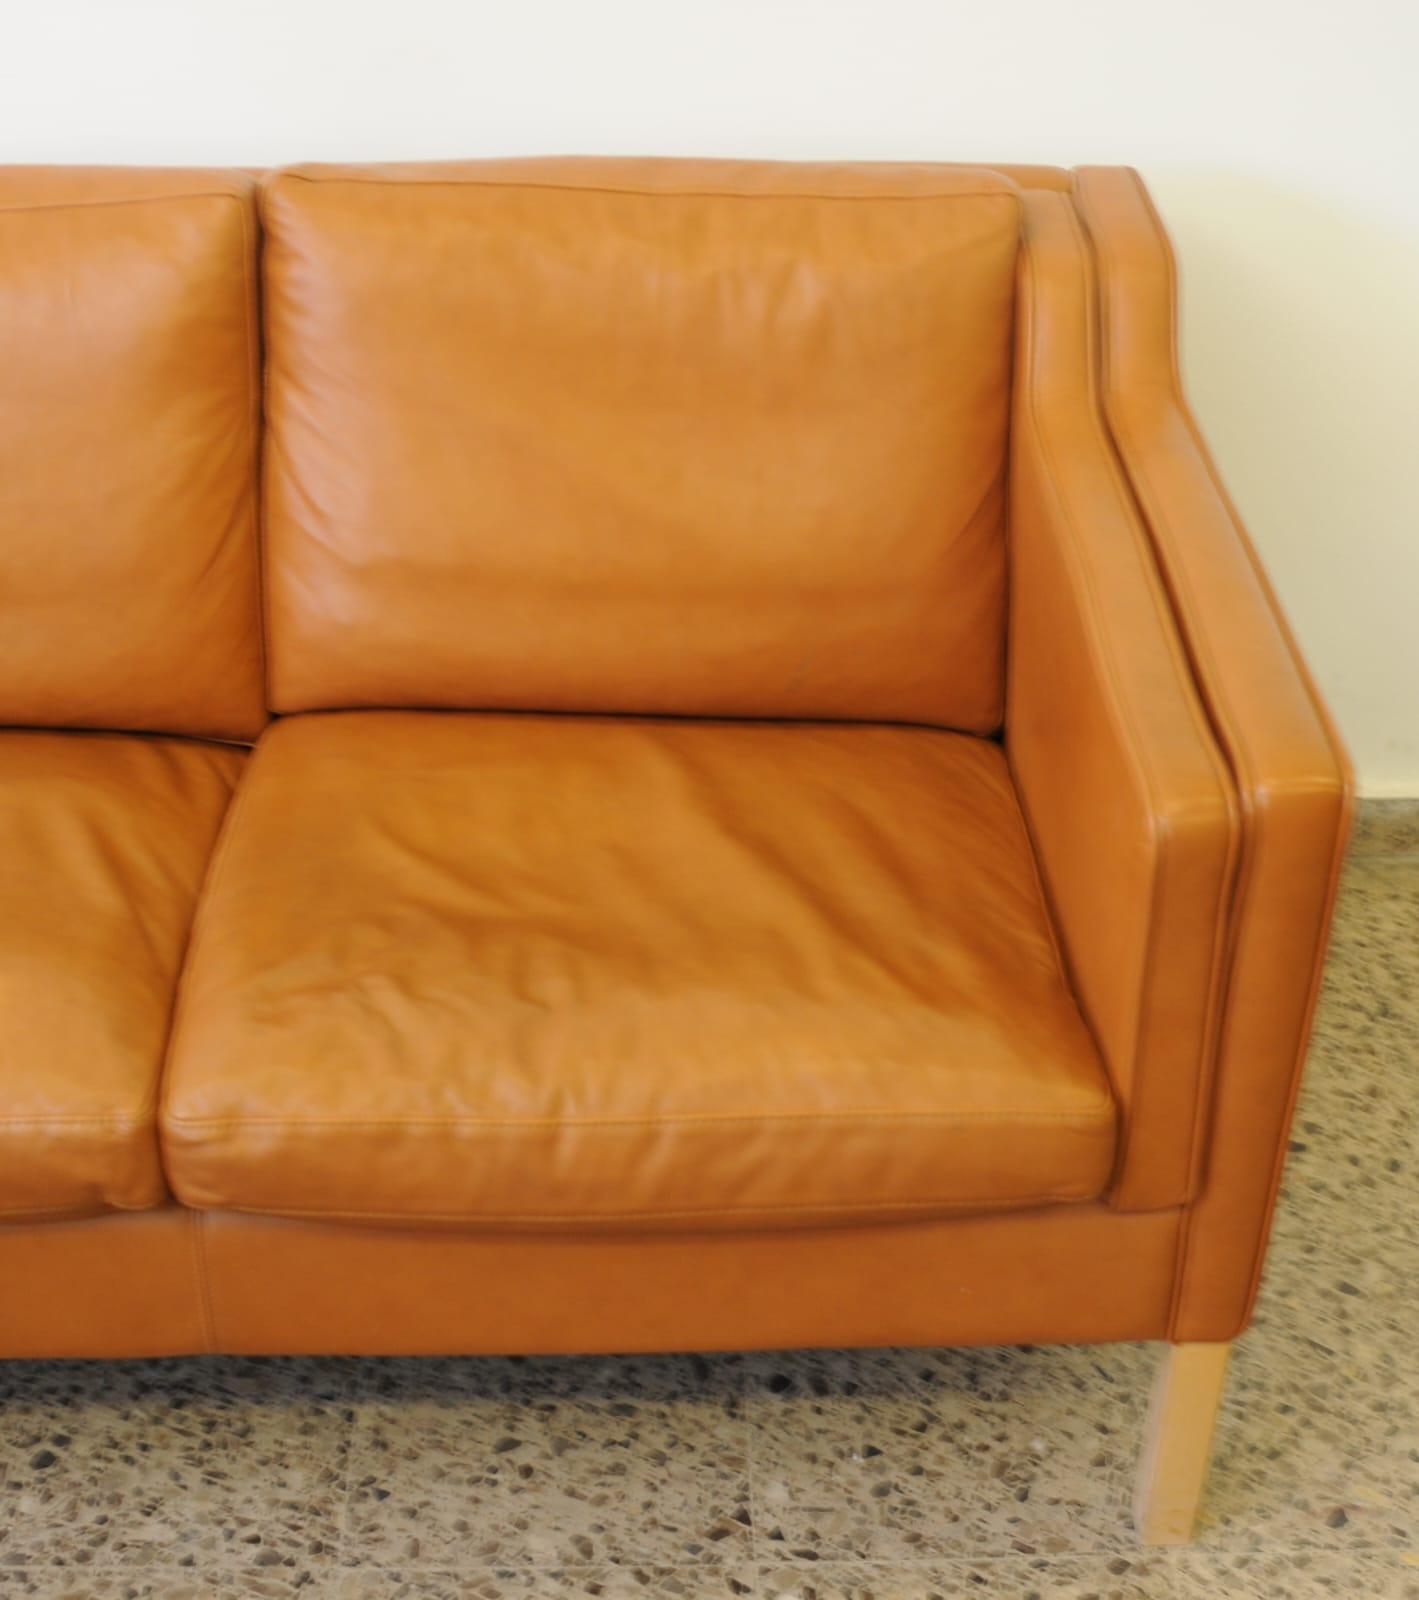 Eva Danish Cognac Leather Sofa by Stouby In Good Condition For Sale In PEGO, ES